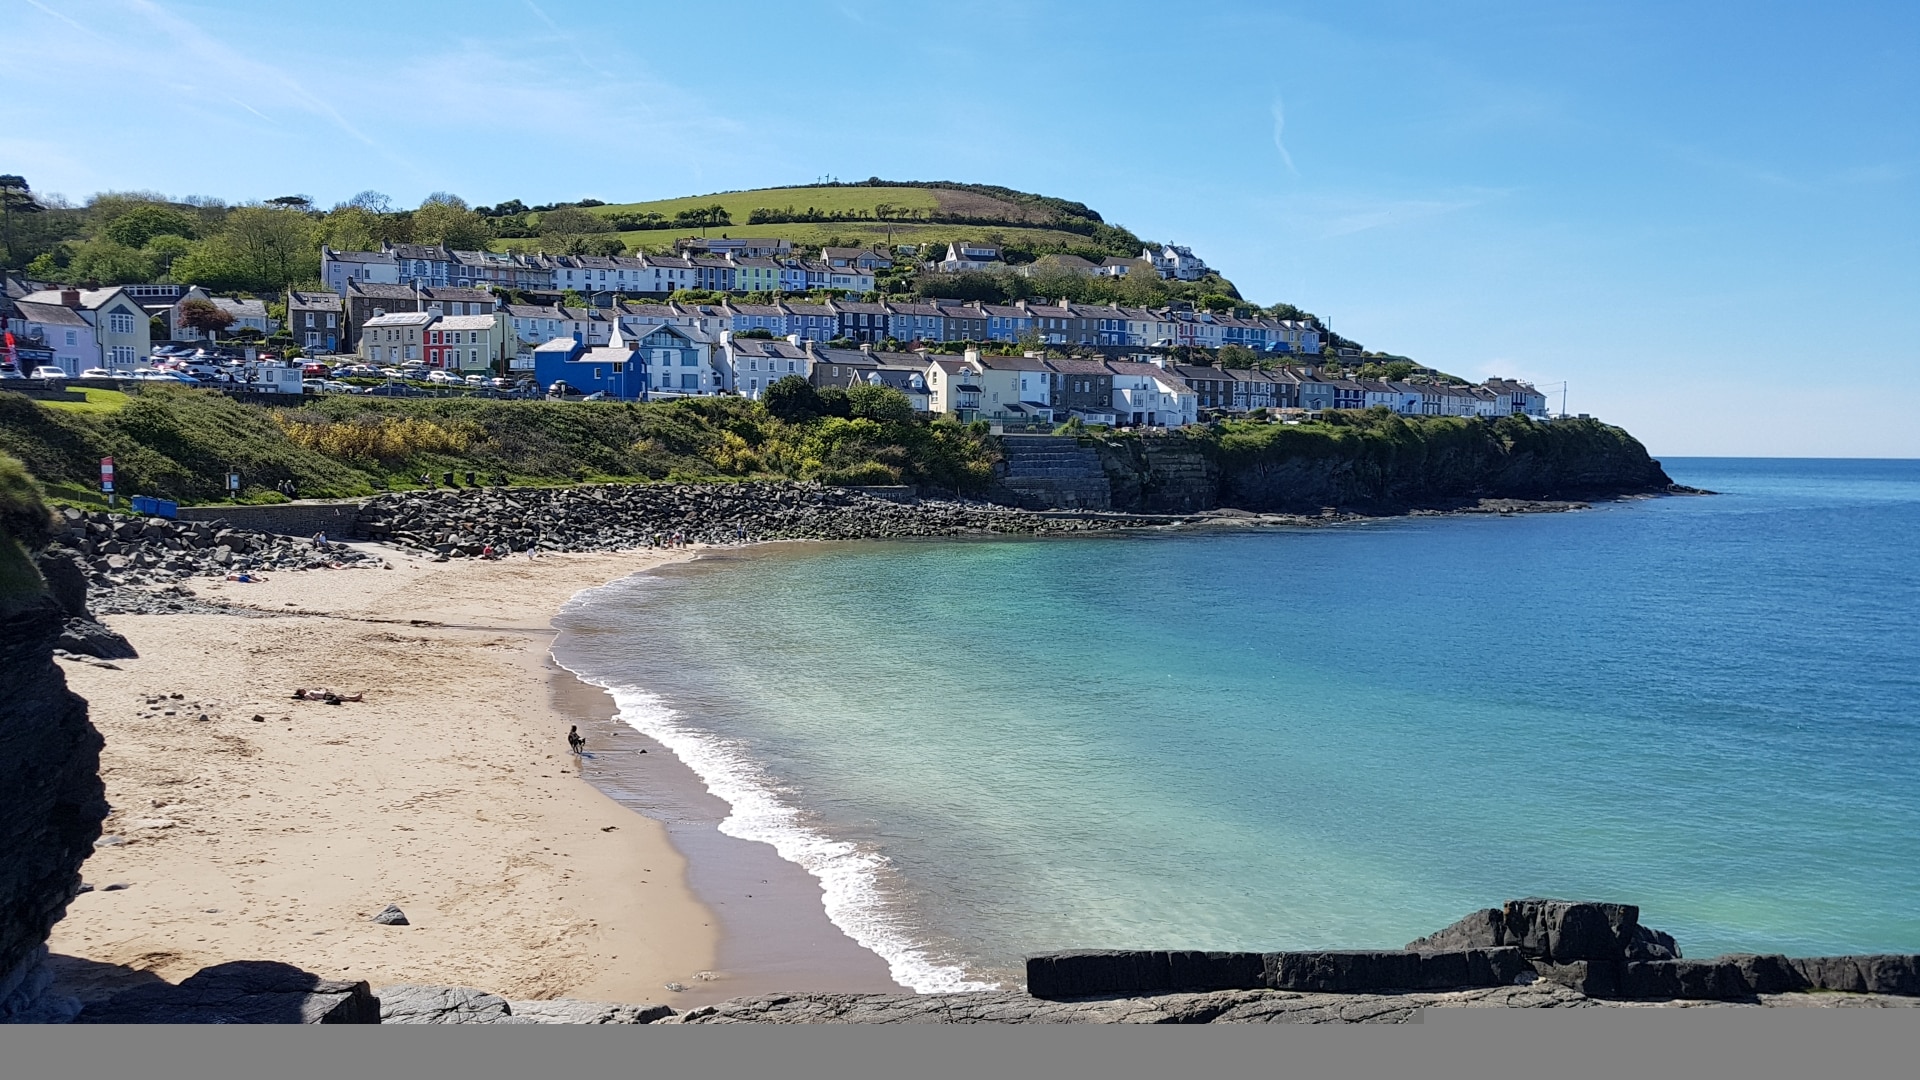 One of the New Quay beaches